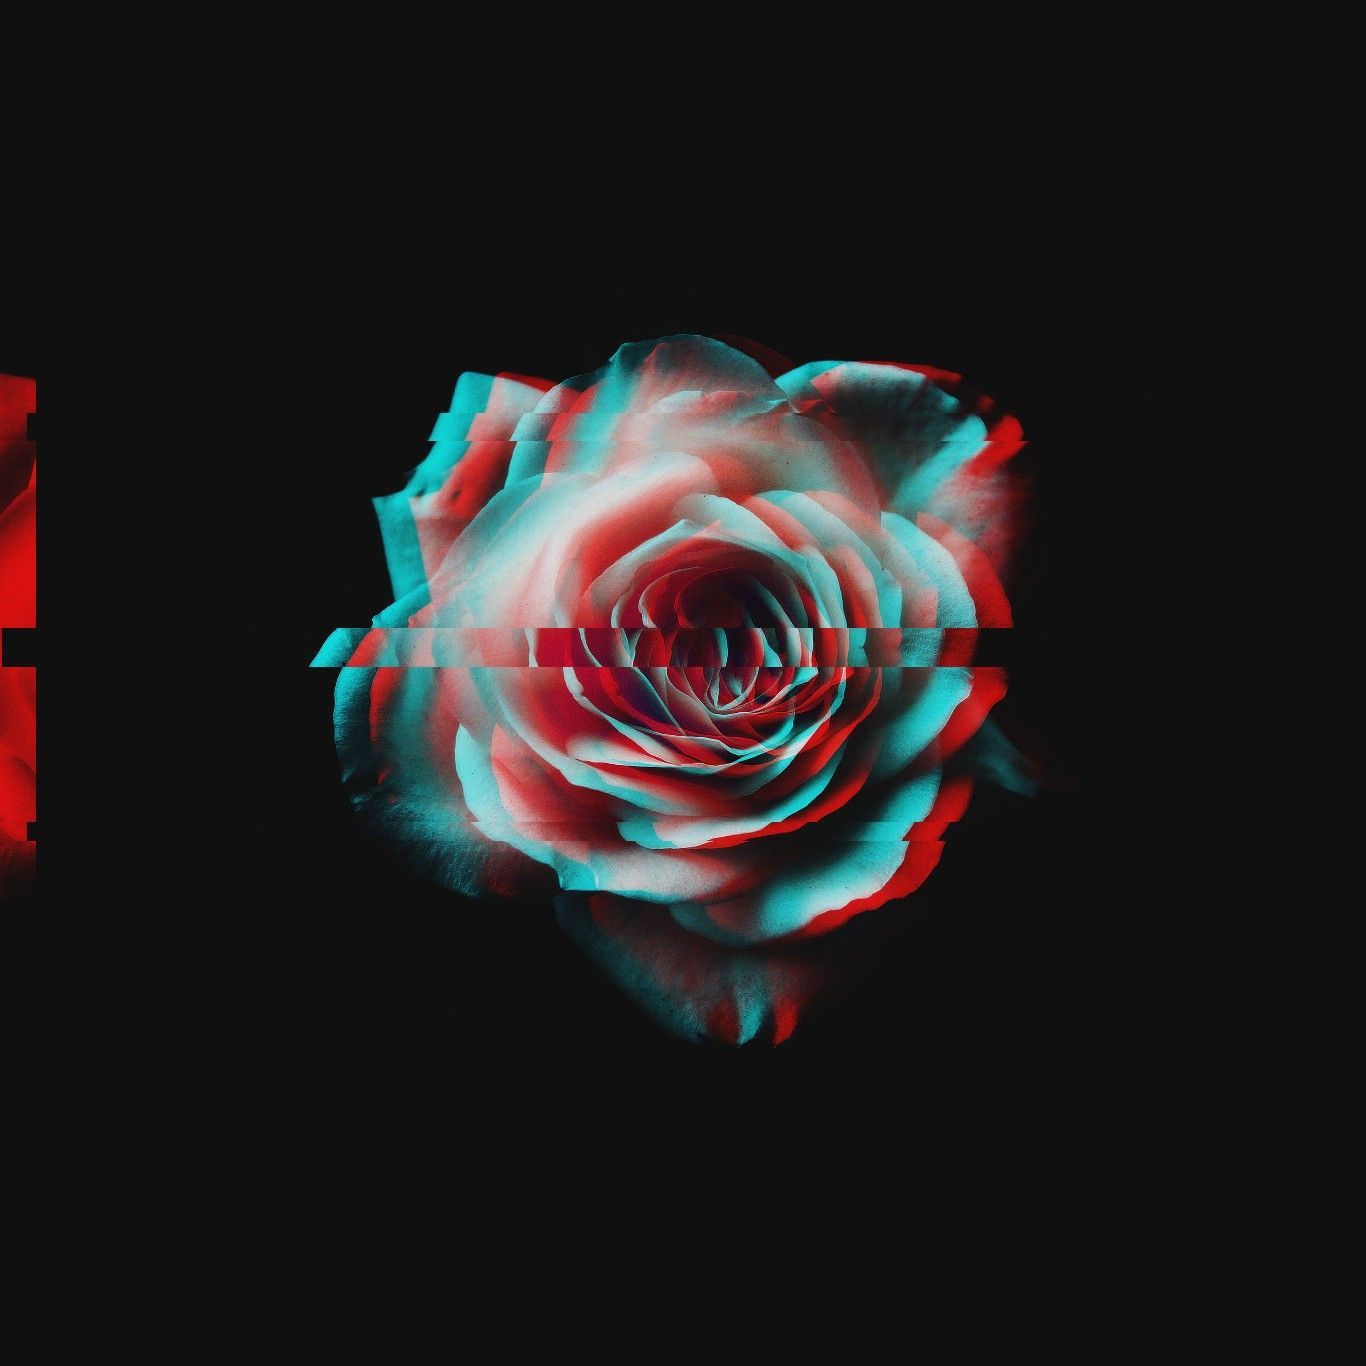 Rose Glitch Wallpapers   Top Free Rose Glitch Backgrounds